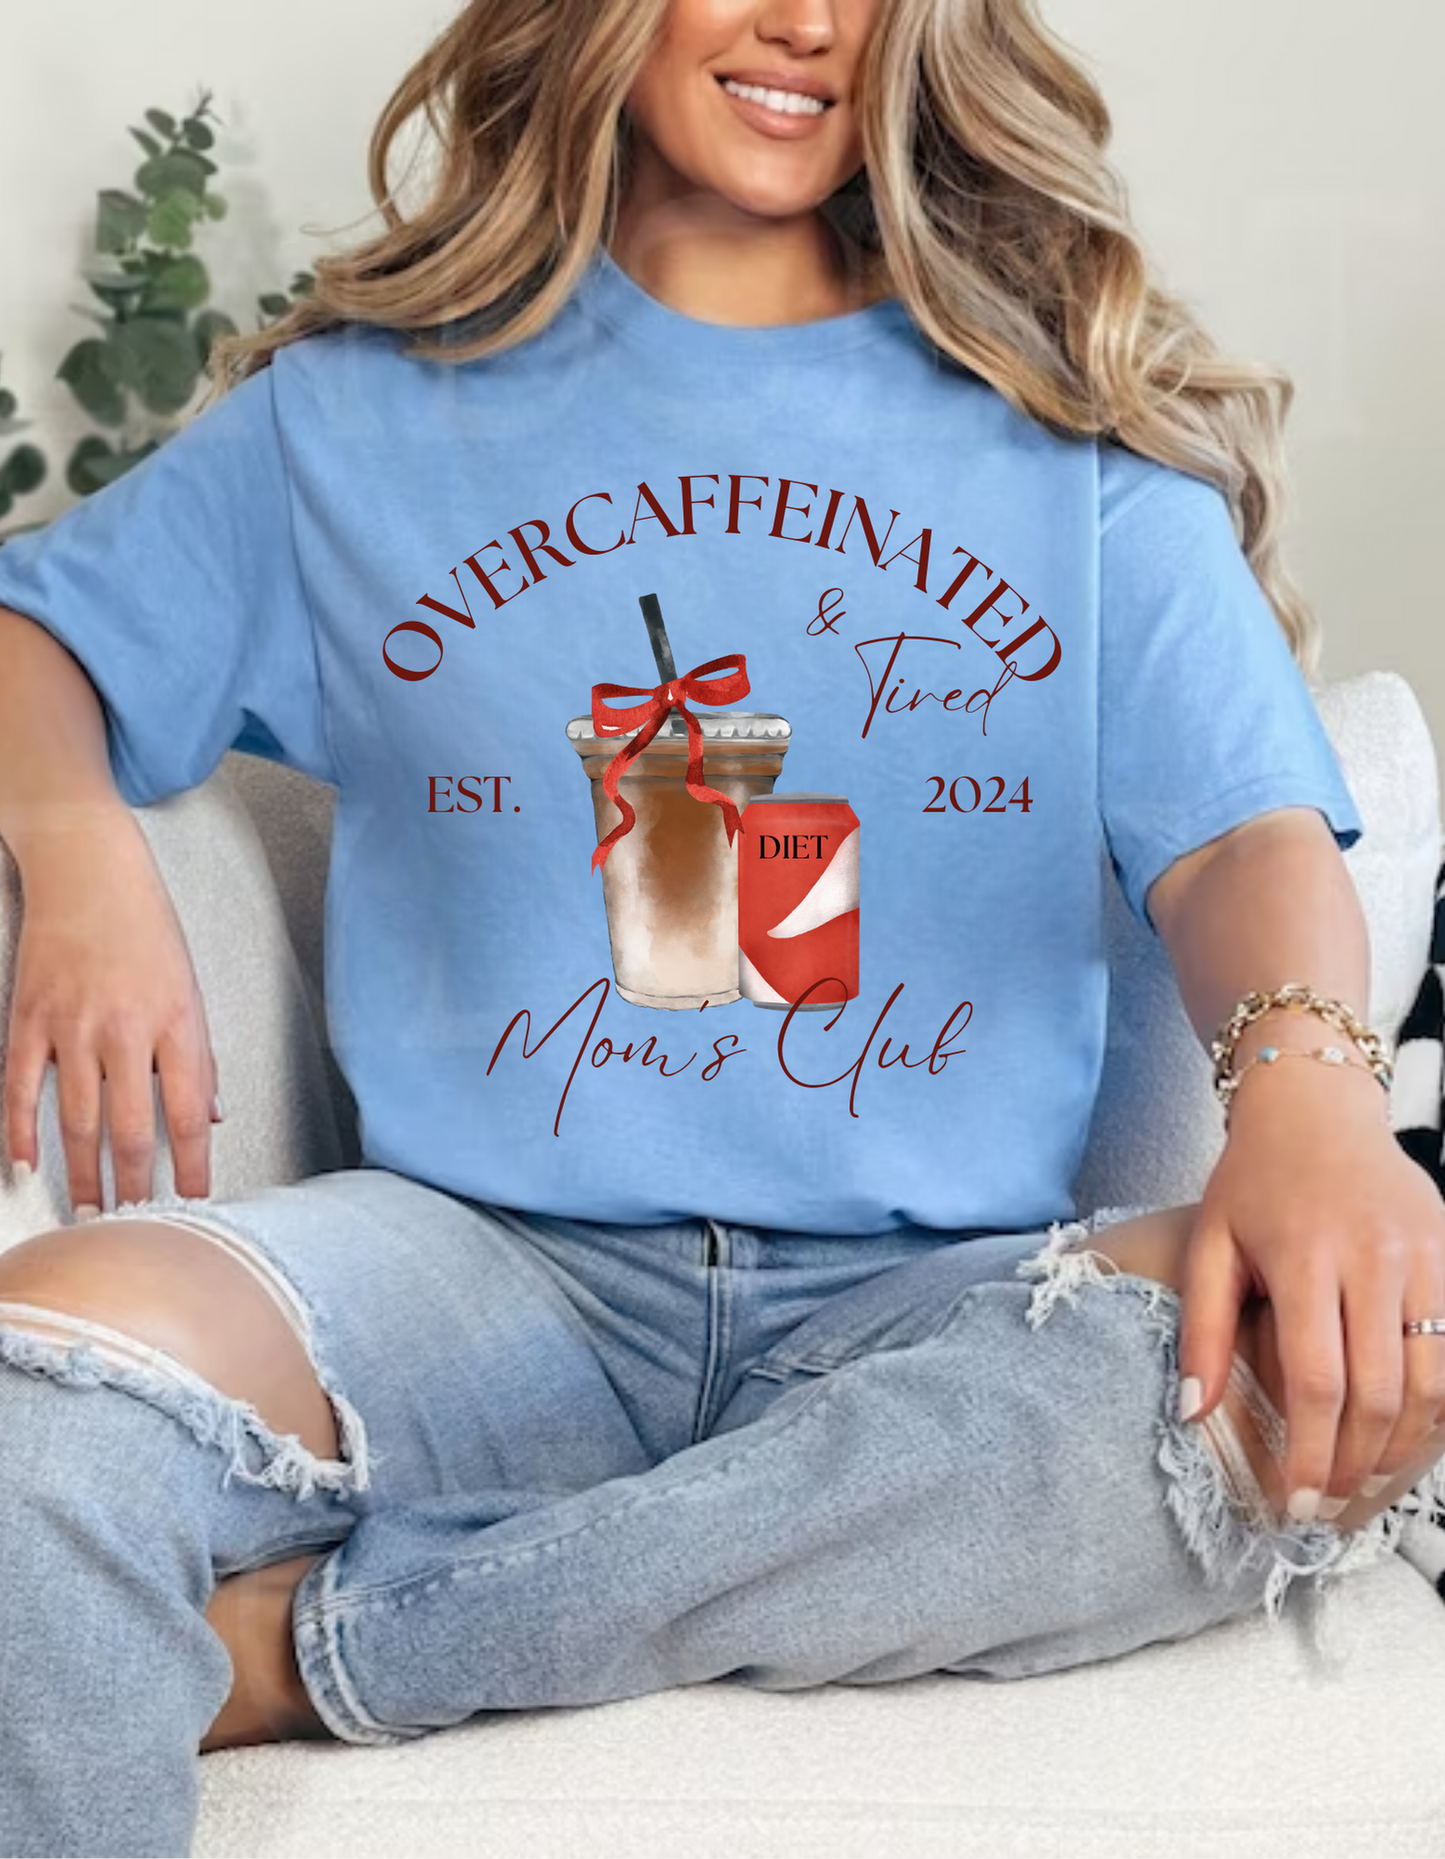 Overcaffeinated and Tired Mom's Club Adult Tees